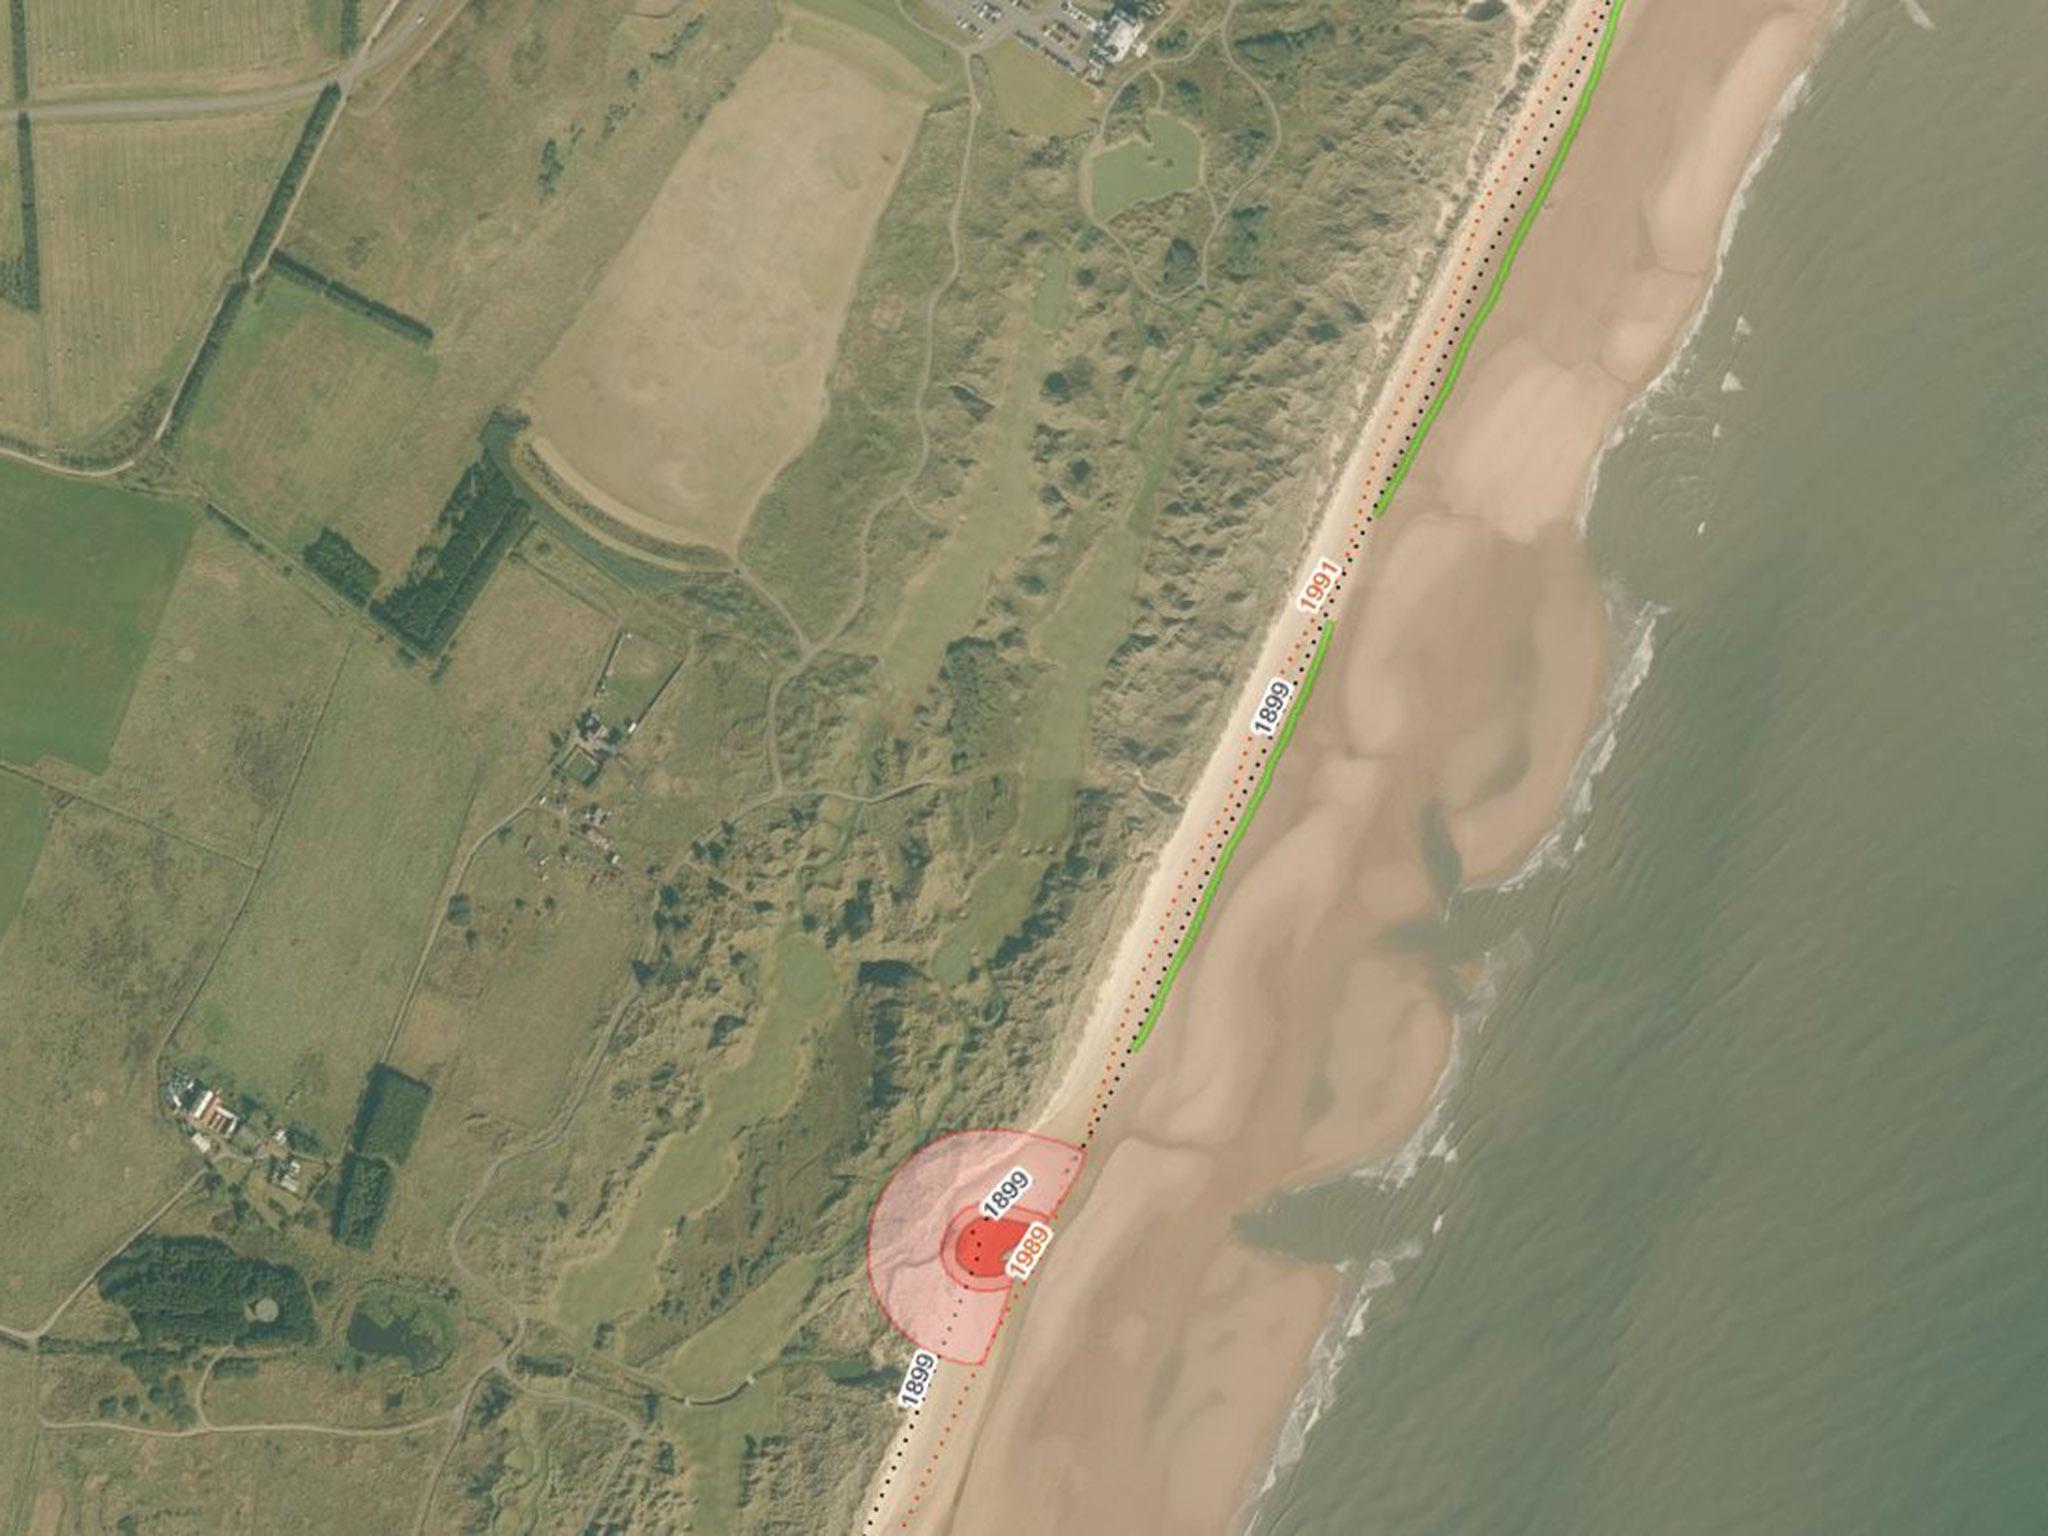 An aerial map showing where the coast is likely to recede. The green line shows how far back the coast will be in 2050 and the red circle marks where erosion will be particularly acute